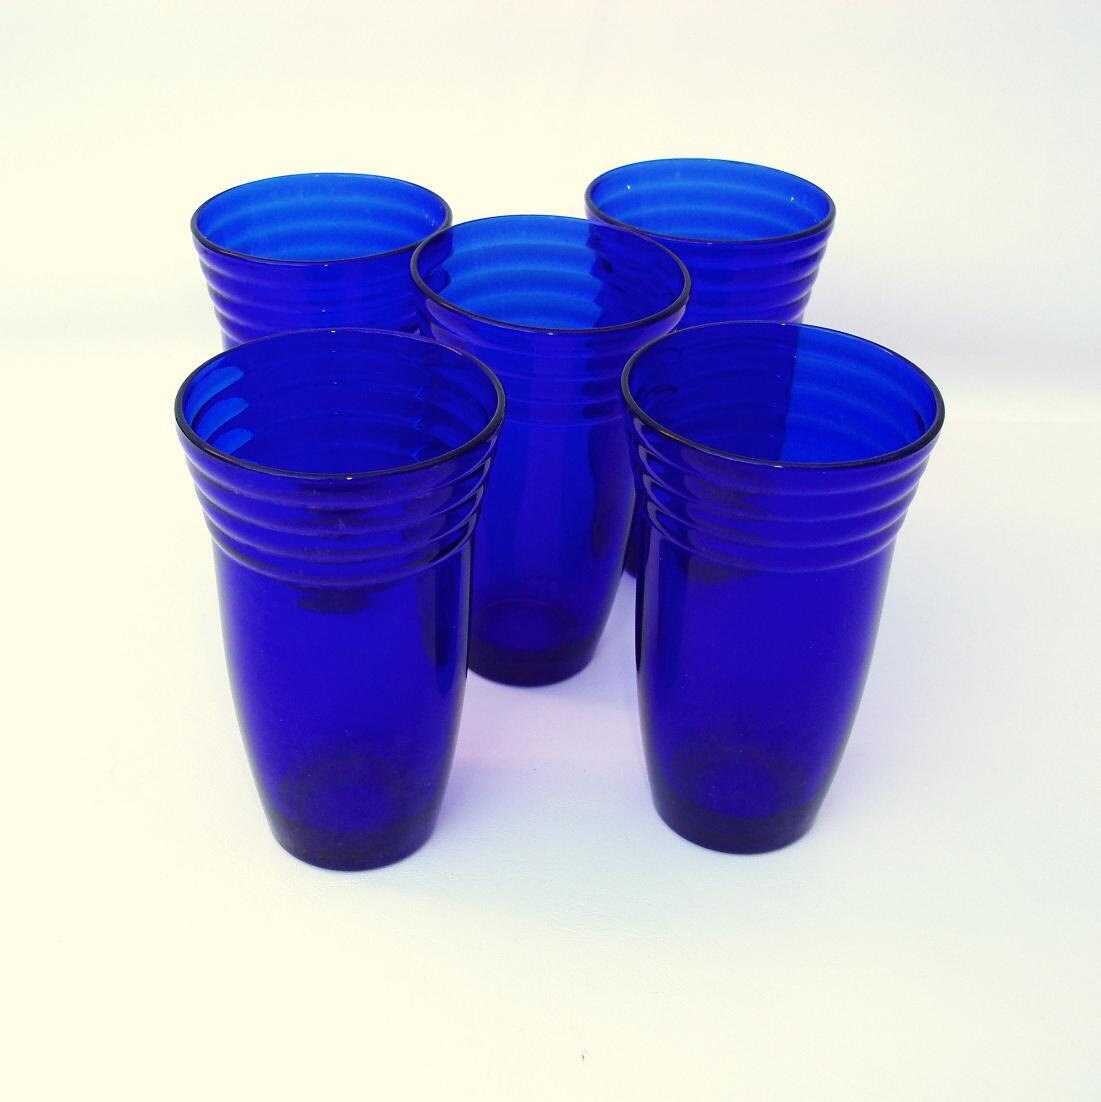 Vintage Cobalt Glass Tumblers Blue Glasses Retro By Whimzythyme